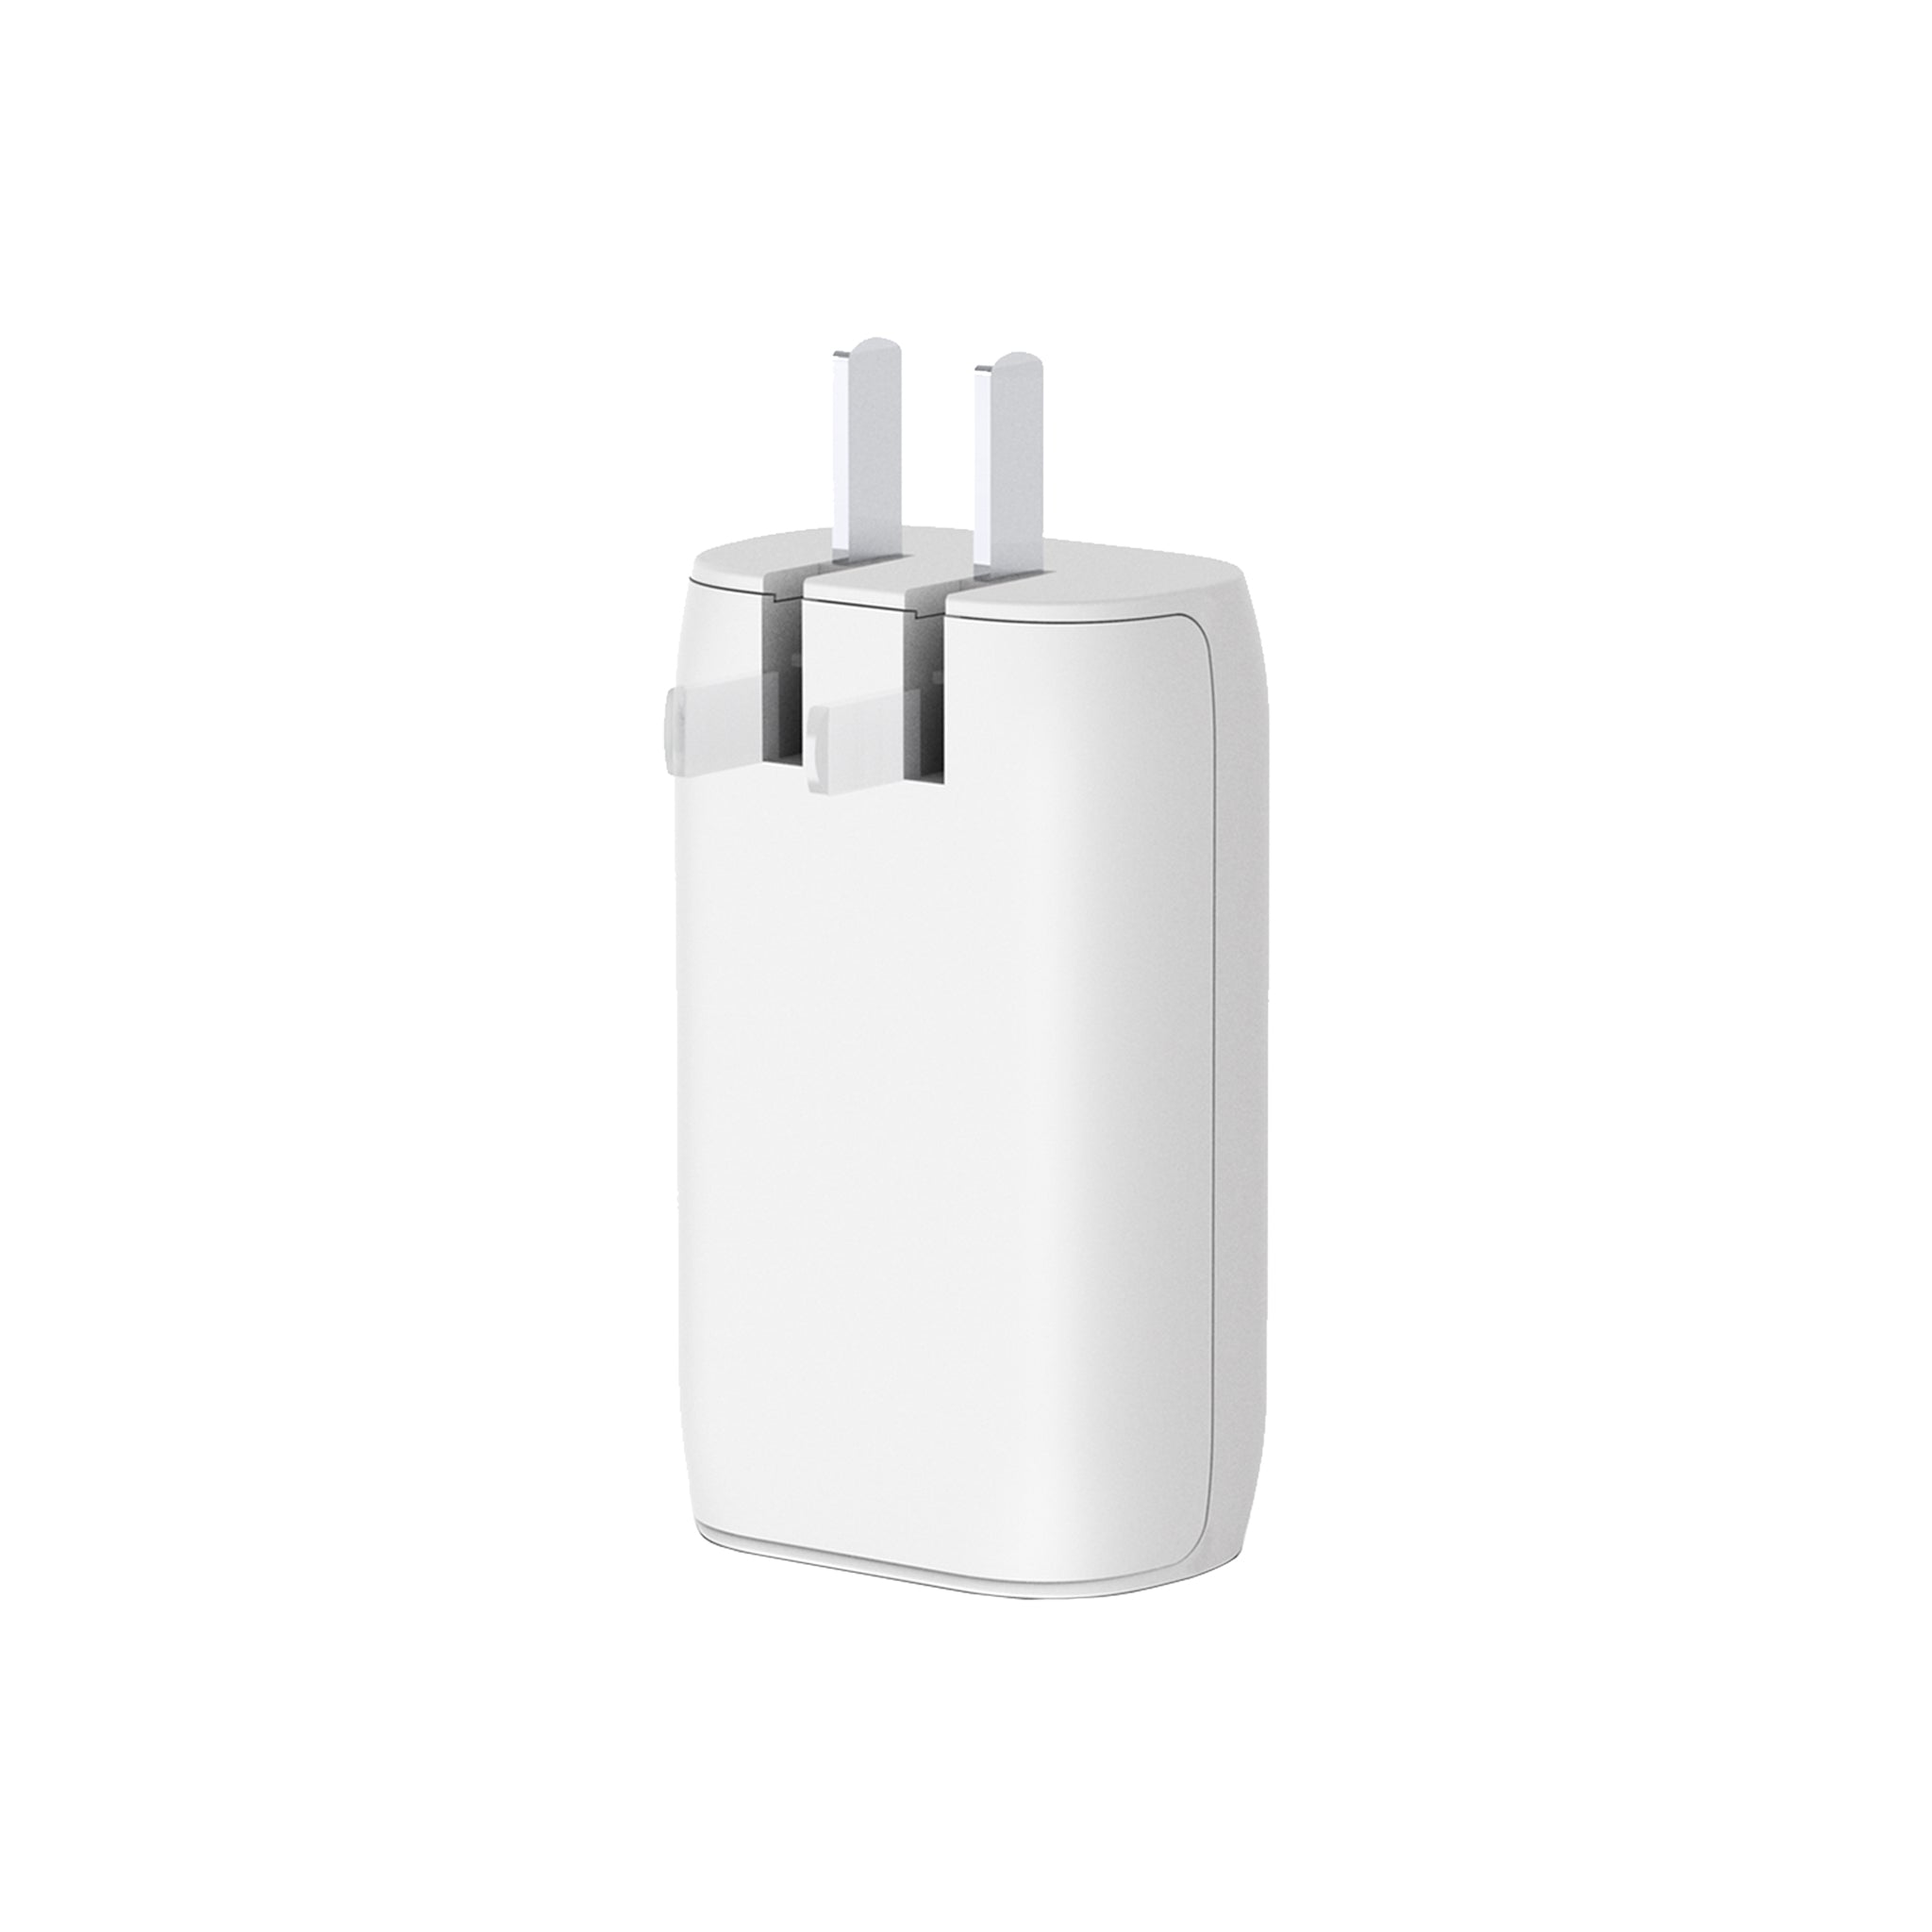 Belkin - Boost Up Dual Port Wall Charger 30w / 6a - White